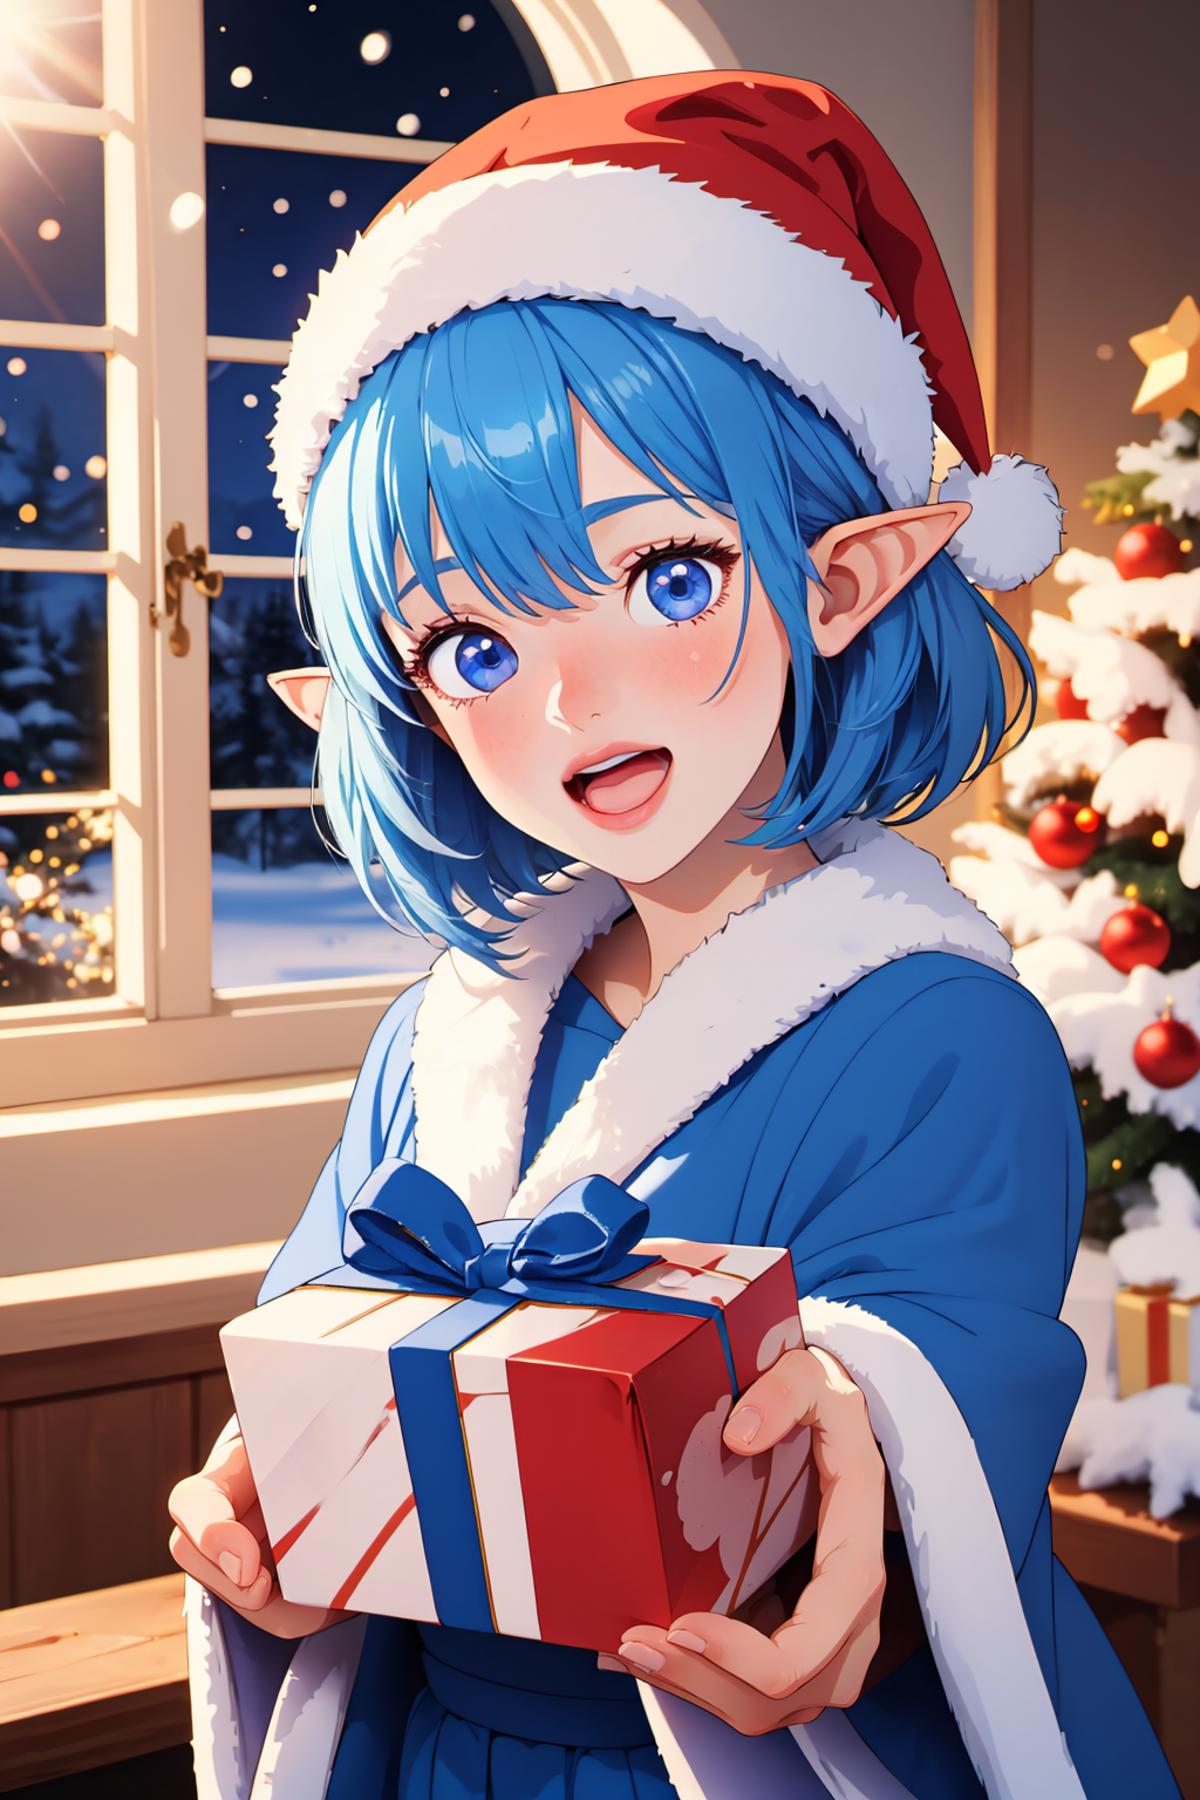 A blue-haired elf girl with blue eyes holding a red and white gift.